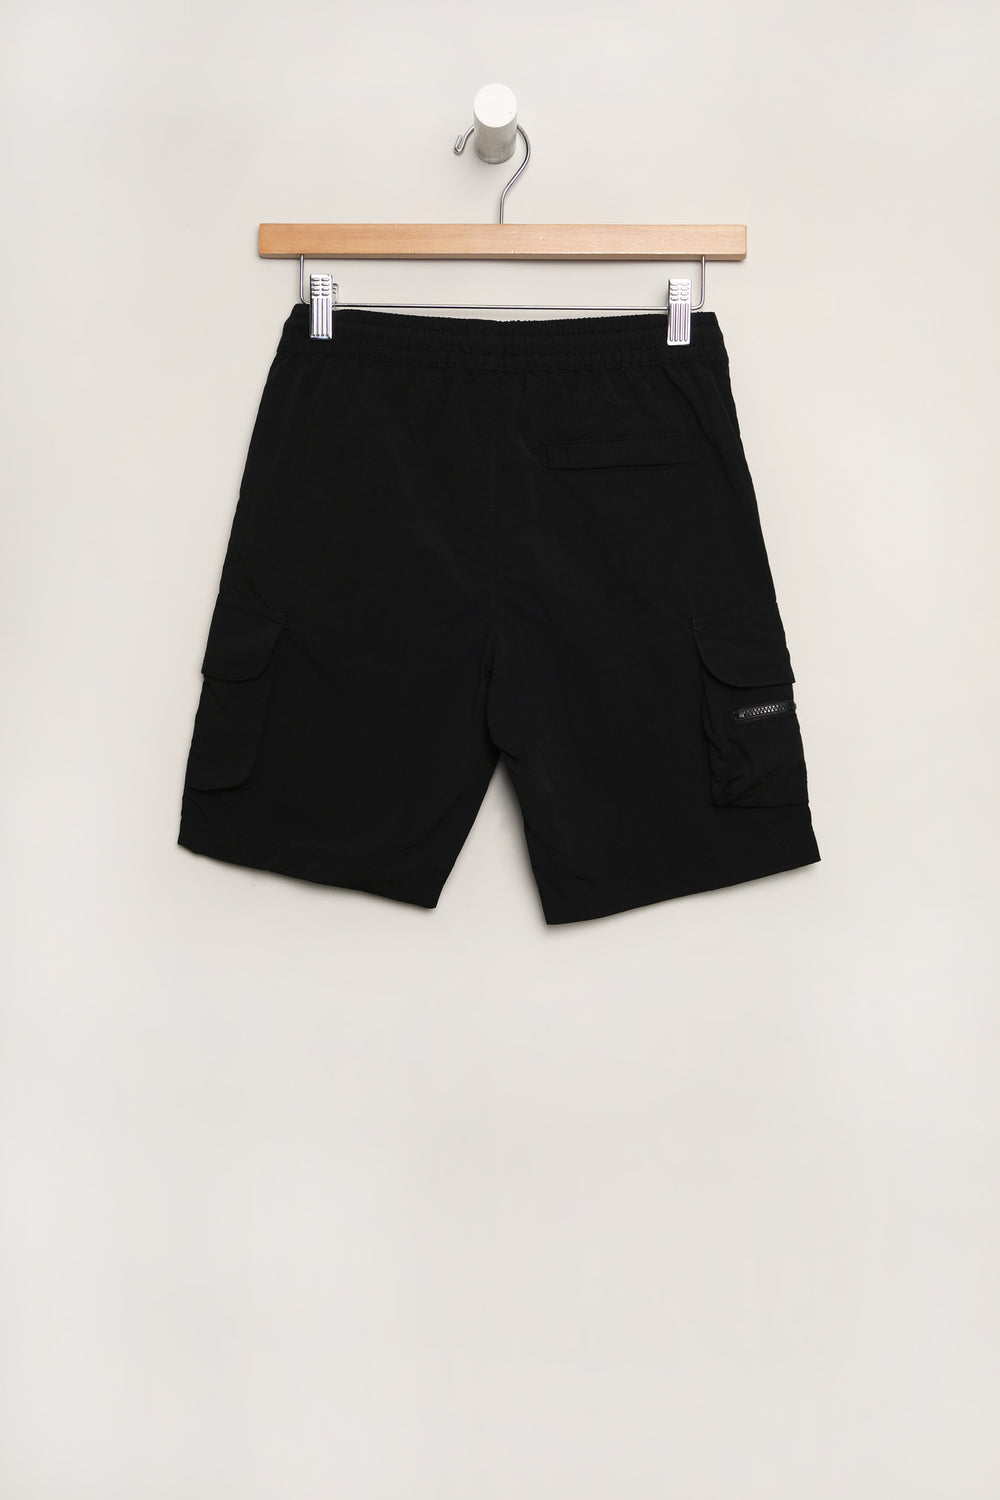 West49 Youth Nylon Cargo Short with Zip West49 Youth Nylon Cargo Short with Zip